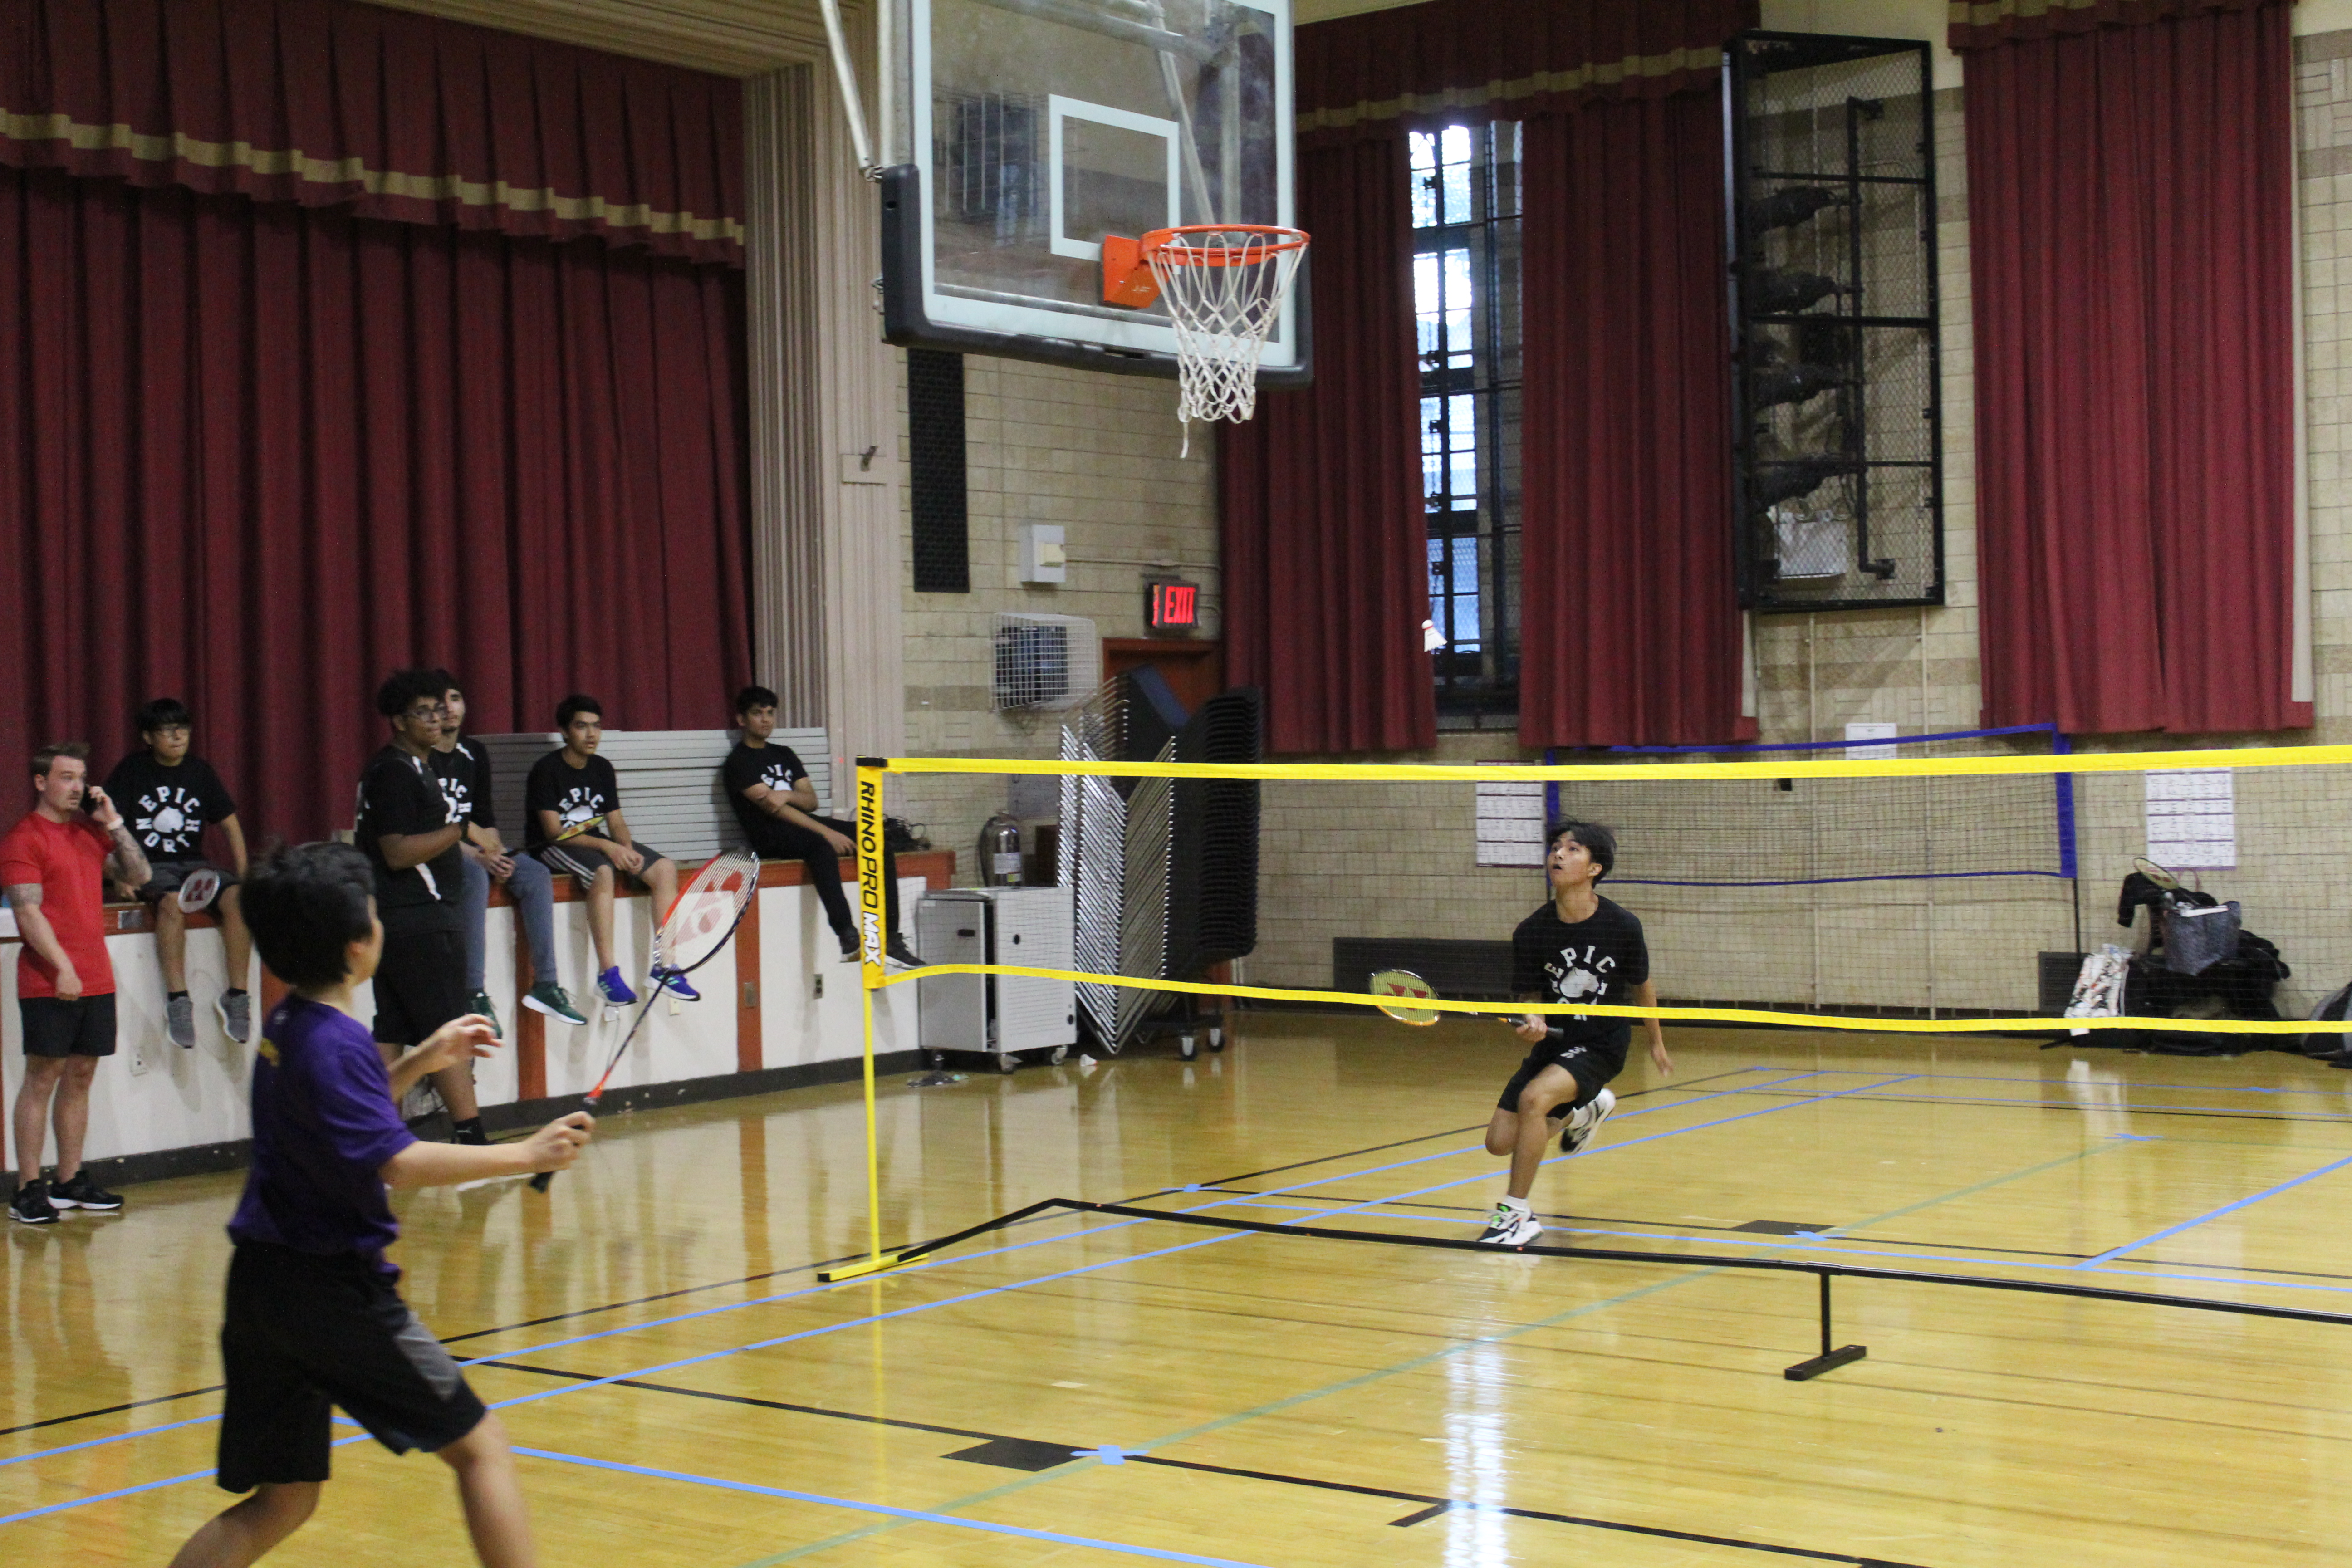 Some badminton in game action 